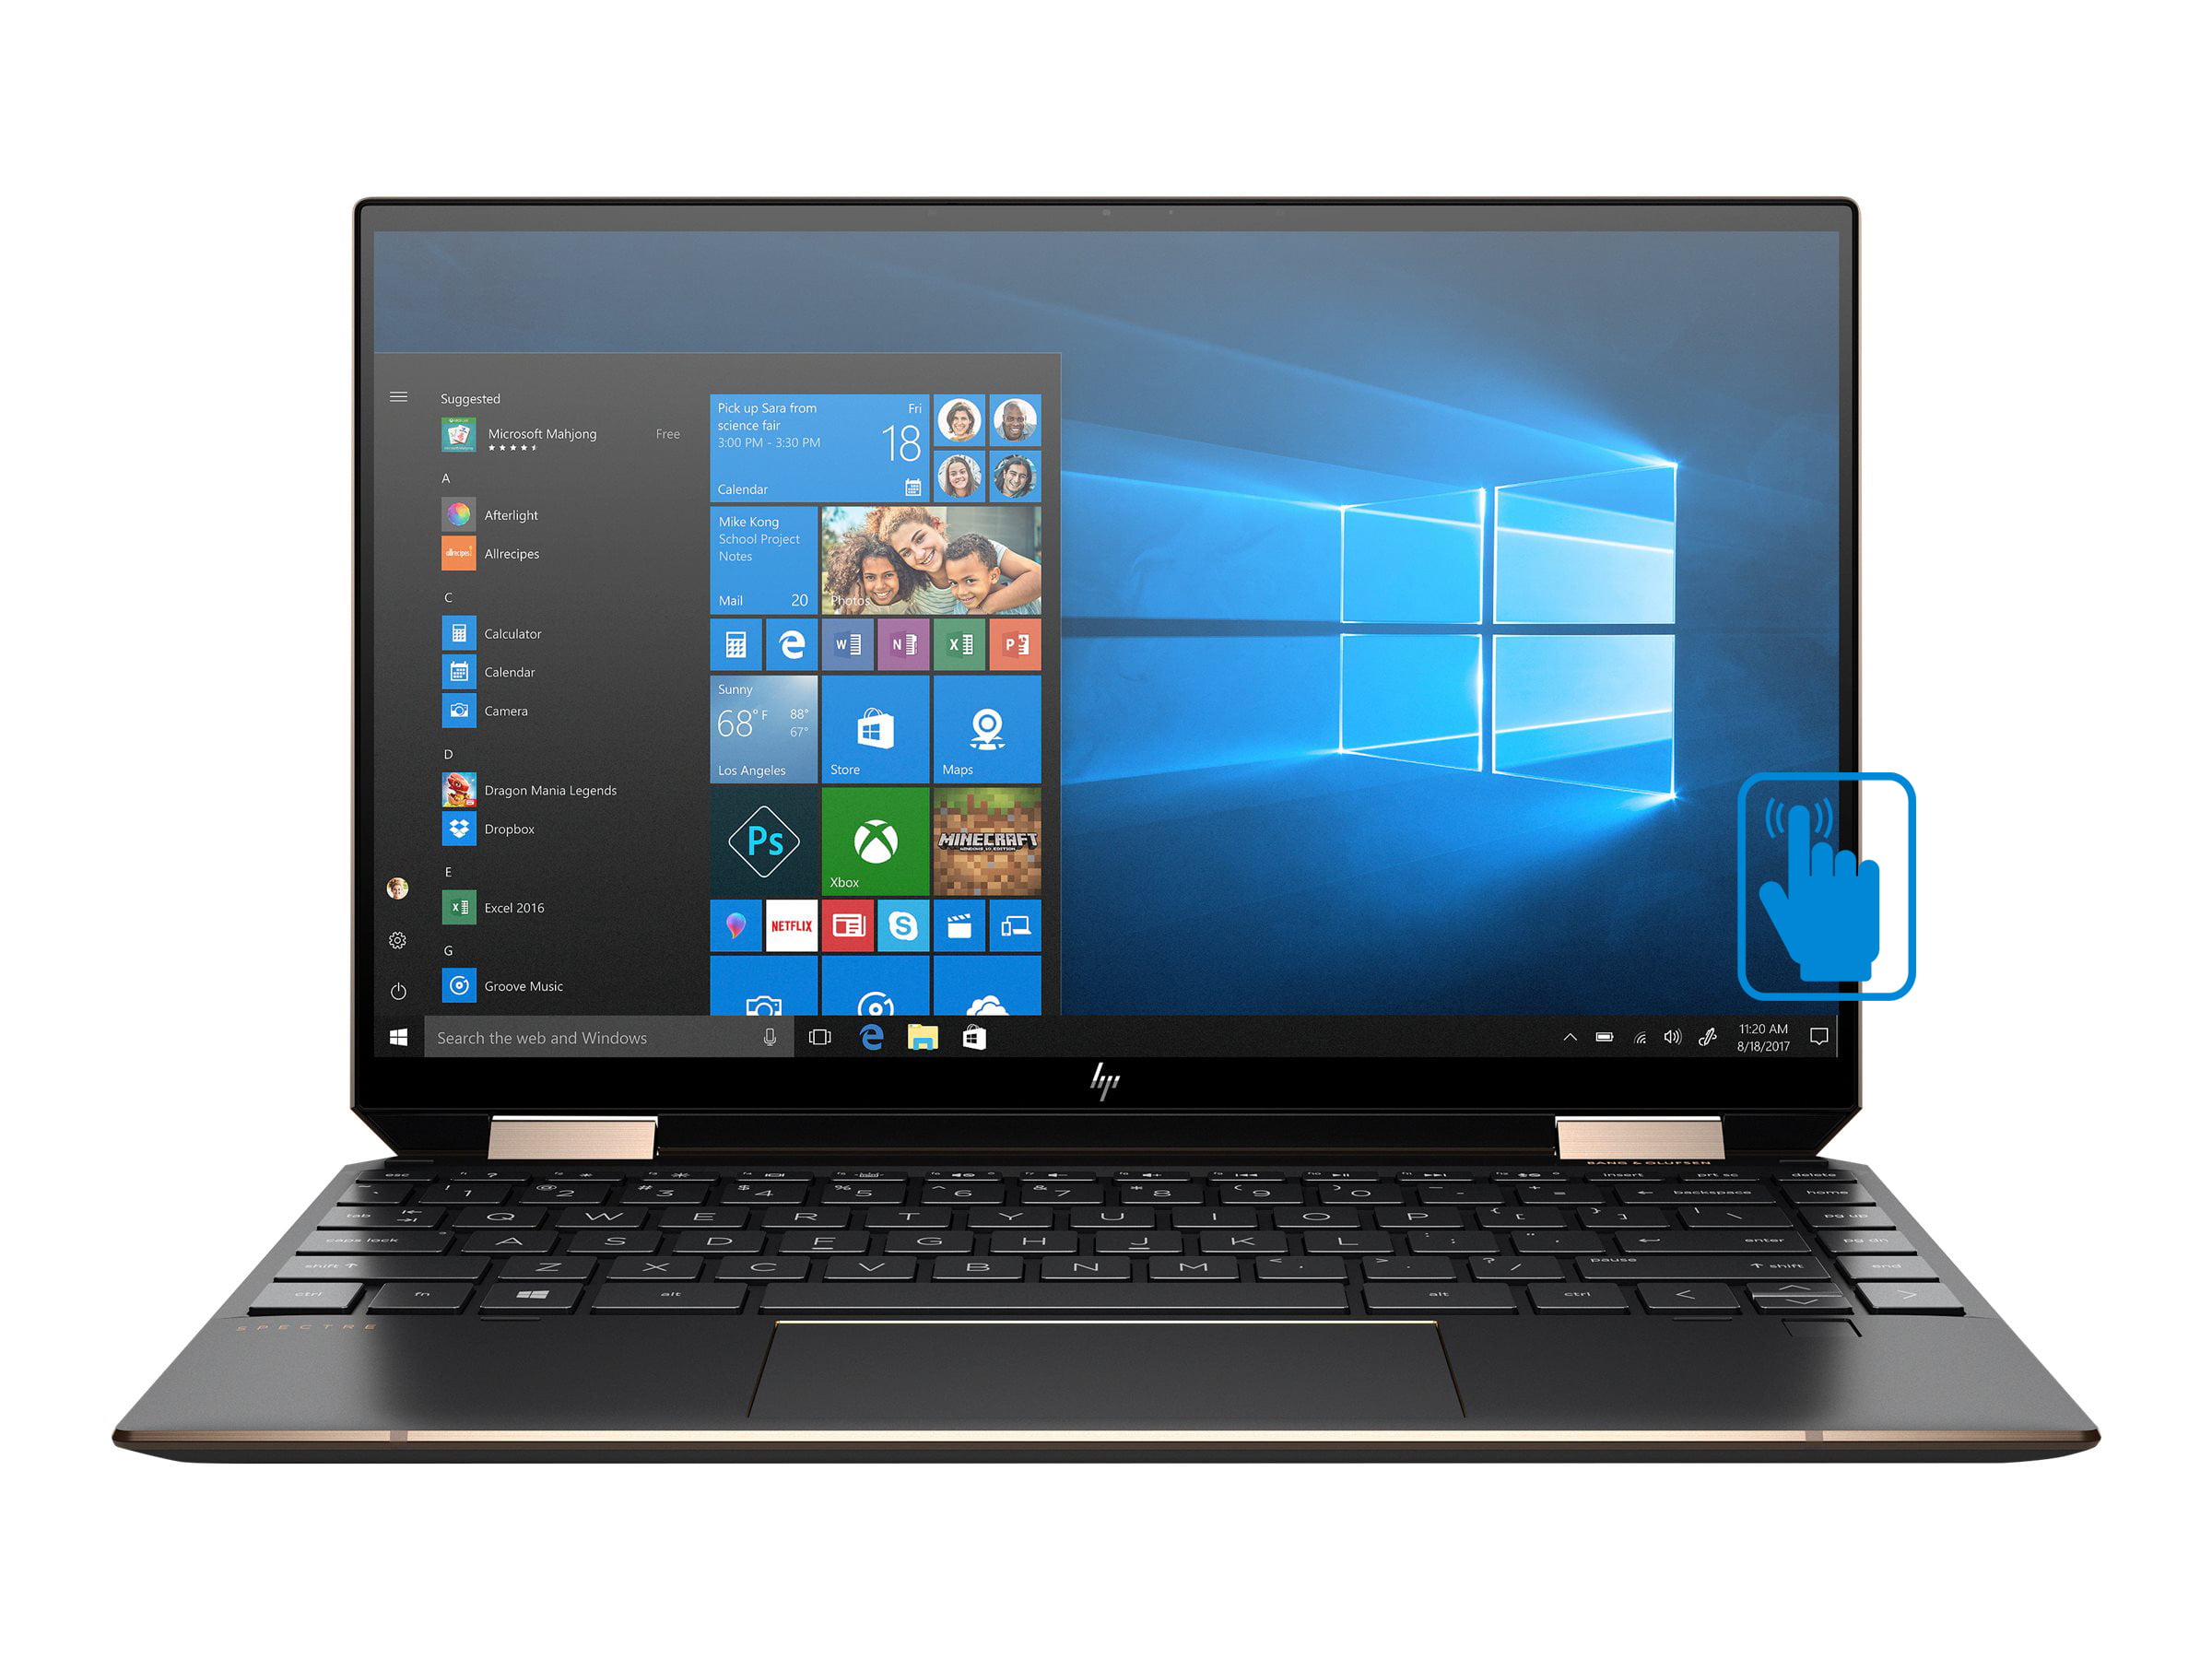 HP Spectre x360 13t Home and Business Laptop (Intel i7-1065G7 4